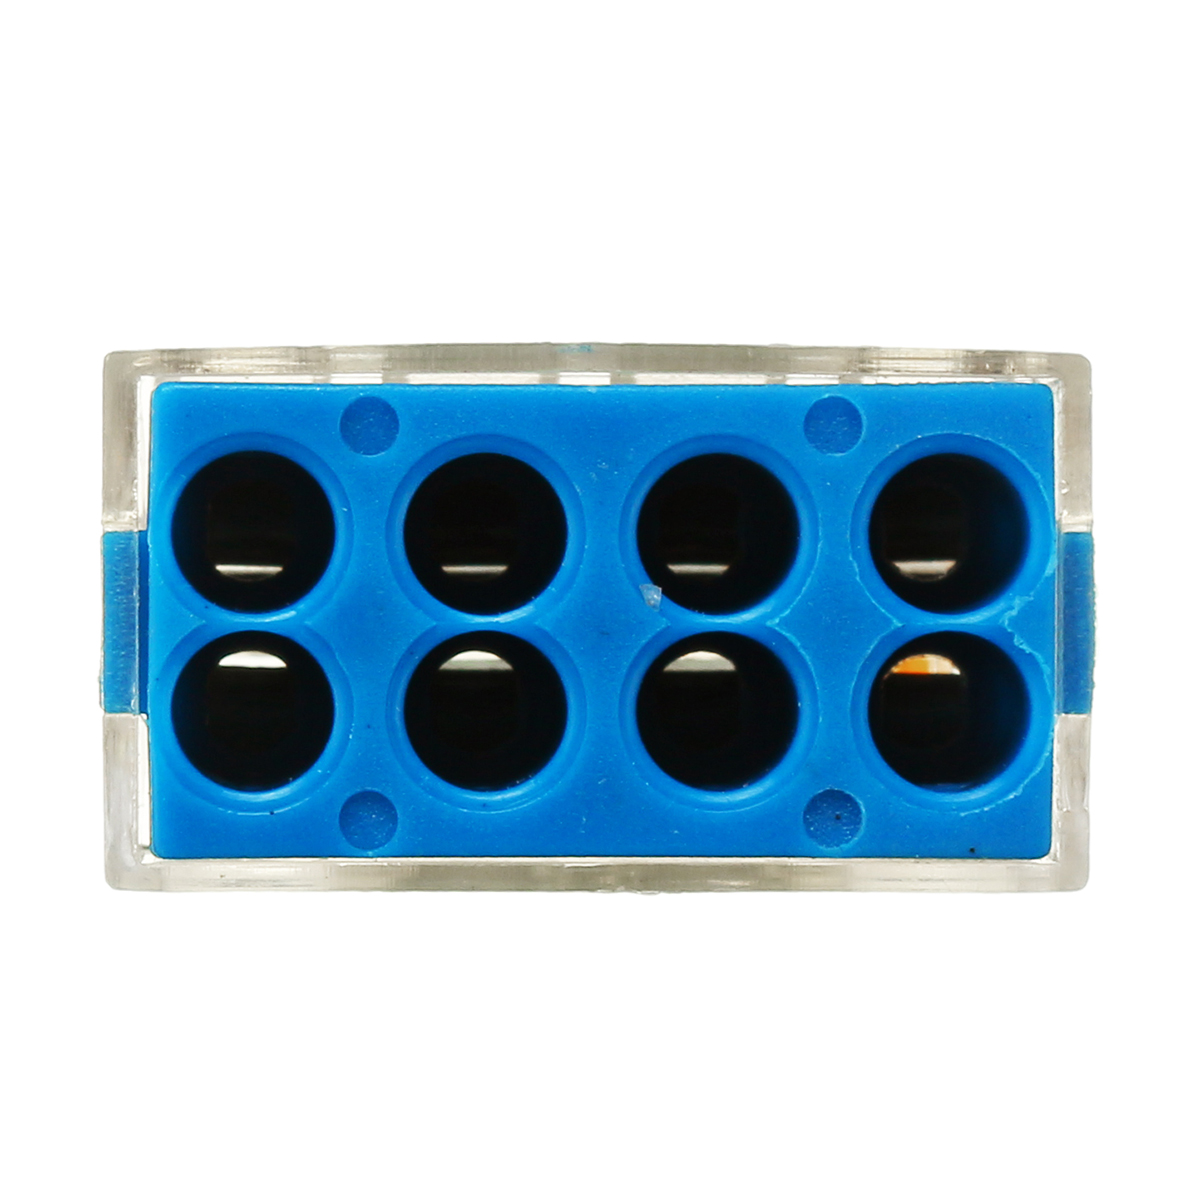 10Pcs-8-Holes-Universal-Compact-Terminal-Block-Electric-Cable-Wire-Connector-1384417-8